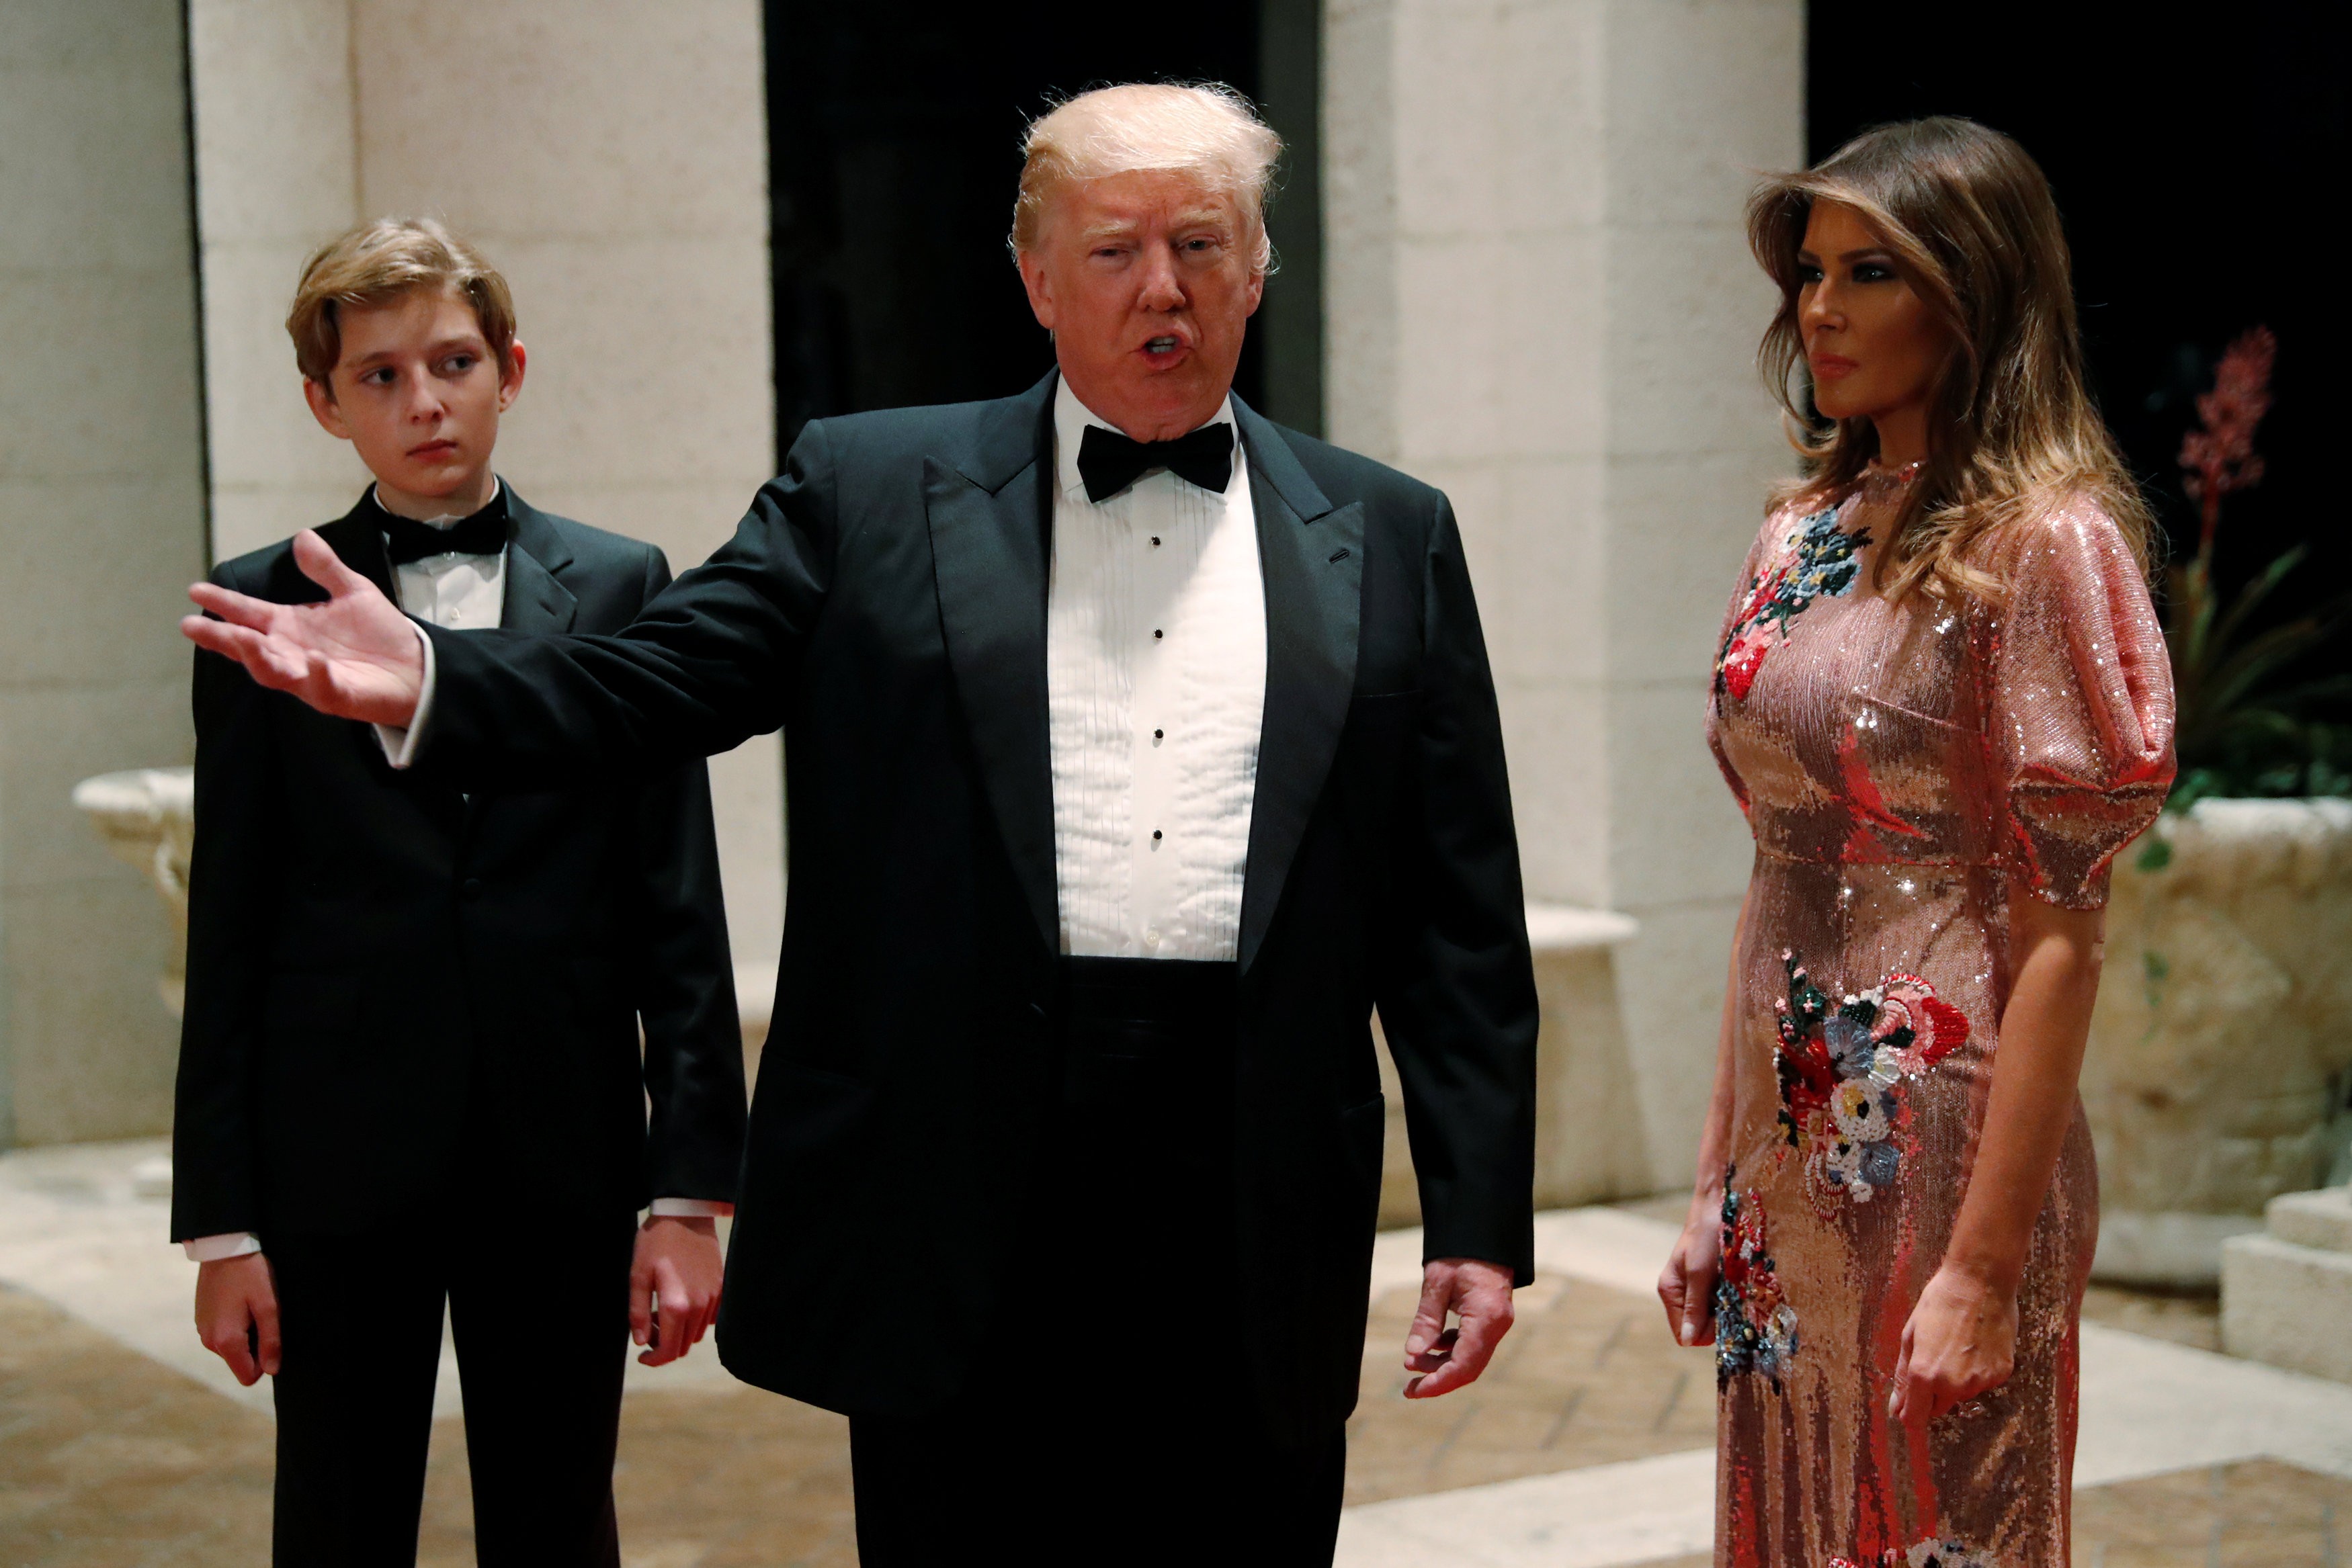 US President Donald Trump, First Lady Melania Trump and their son, Barron, arrive for a New Year’s Eve party at Trump’s Mar-a-Lago club in Palm Beach, Florida, on December 31, 2017. Photo: Reuters